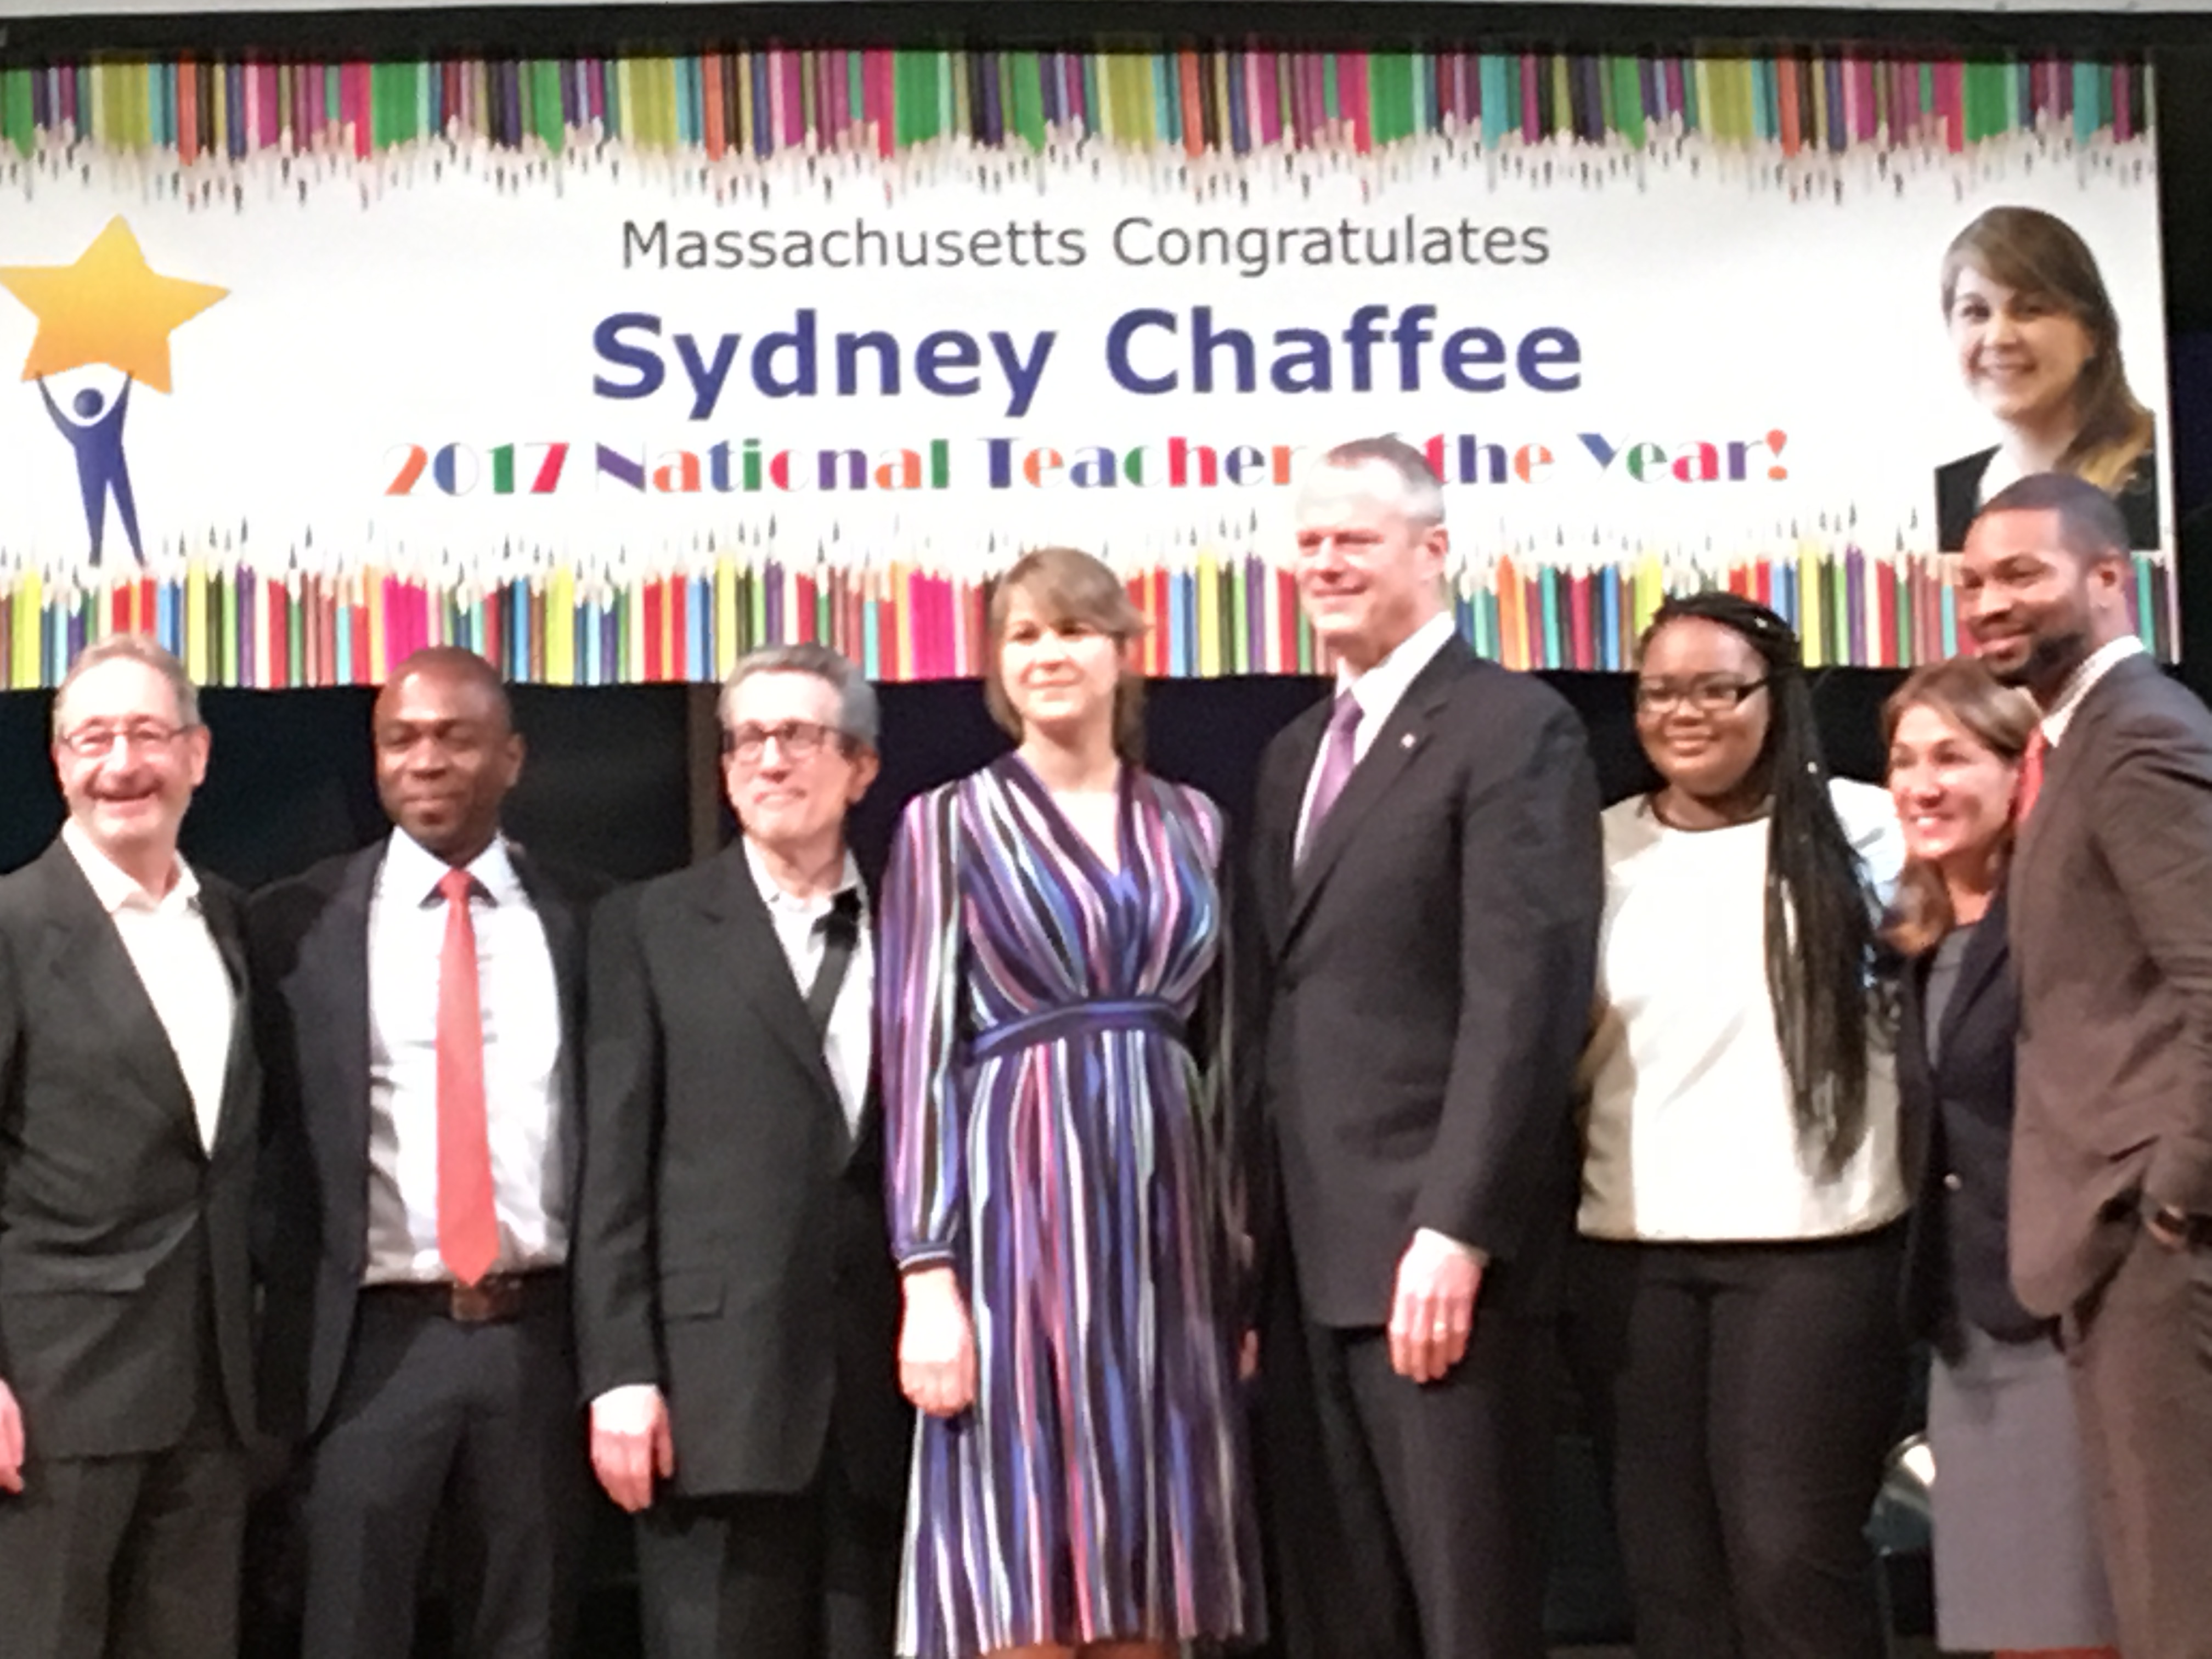 Sydney Chaffee stands on stage with Gov. Charlie Baker, colleagues and students at her ceremony. Behind her is a sign that reads Massachusetts Congratulates Sydney Chaffee.